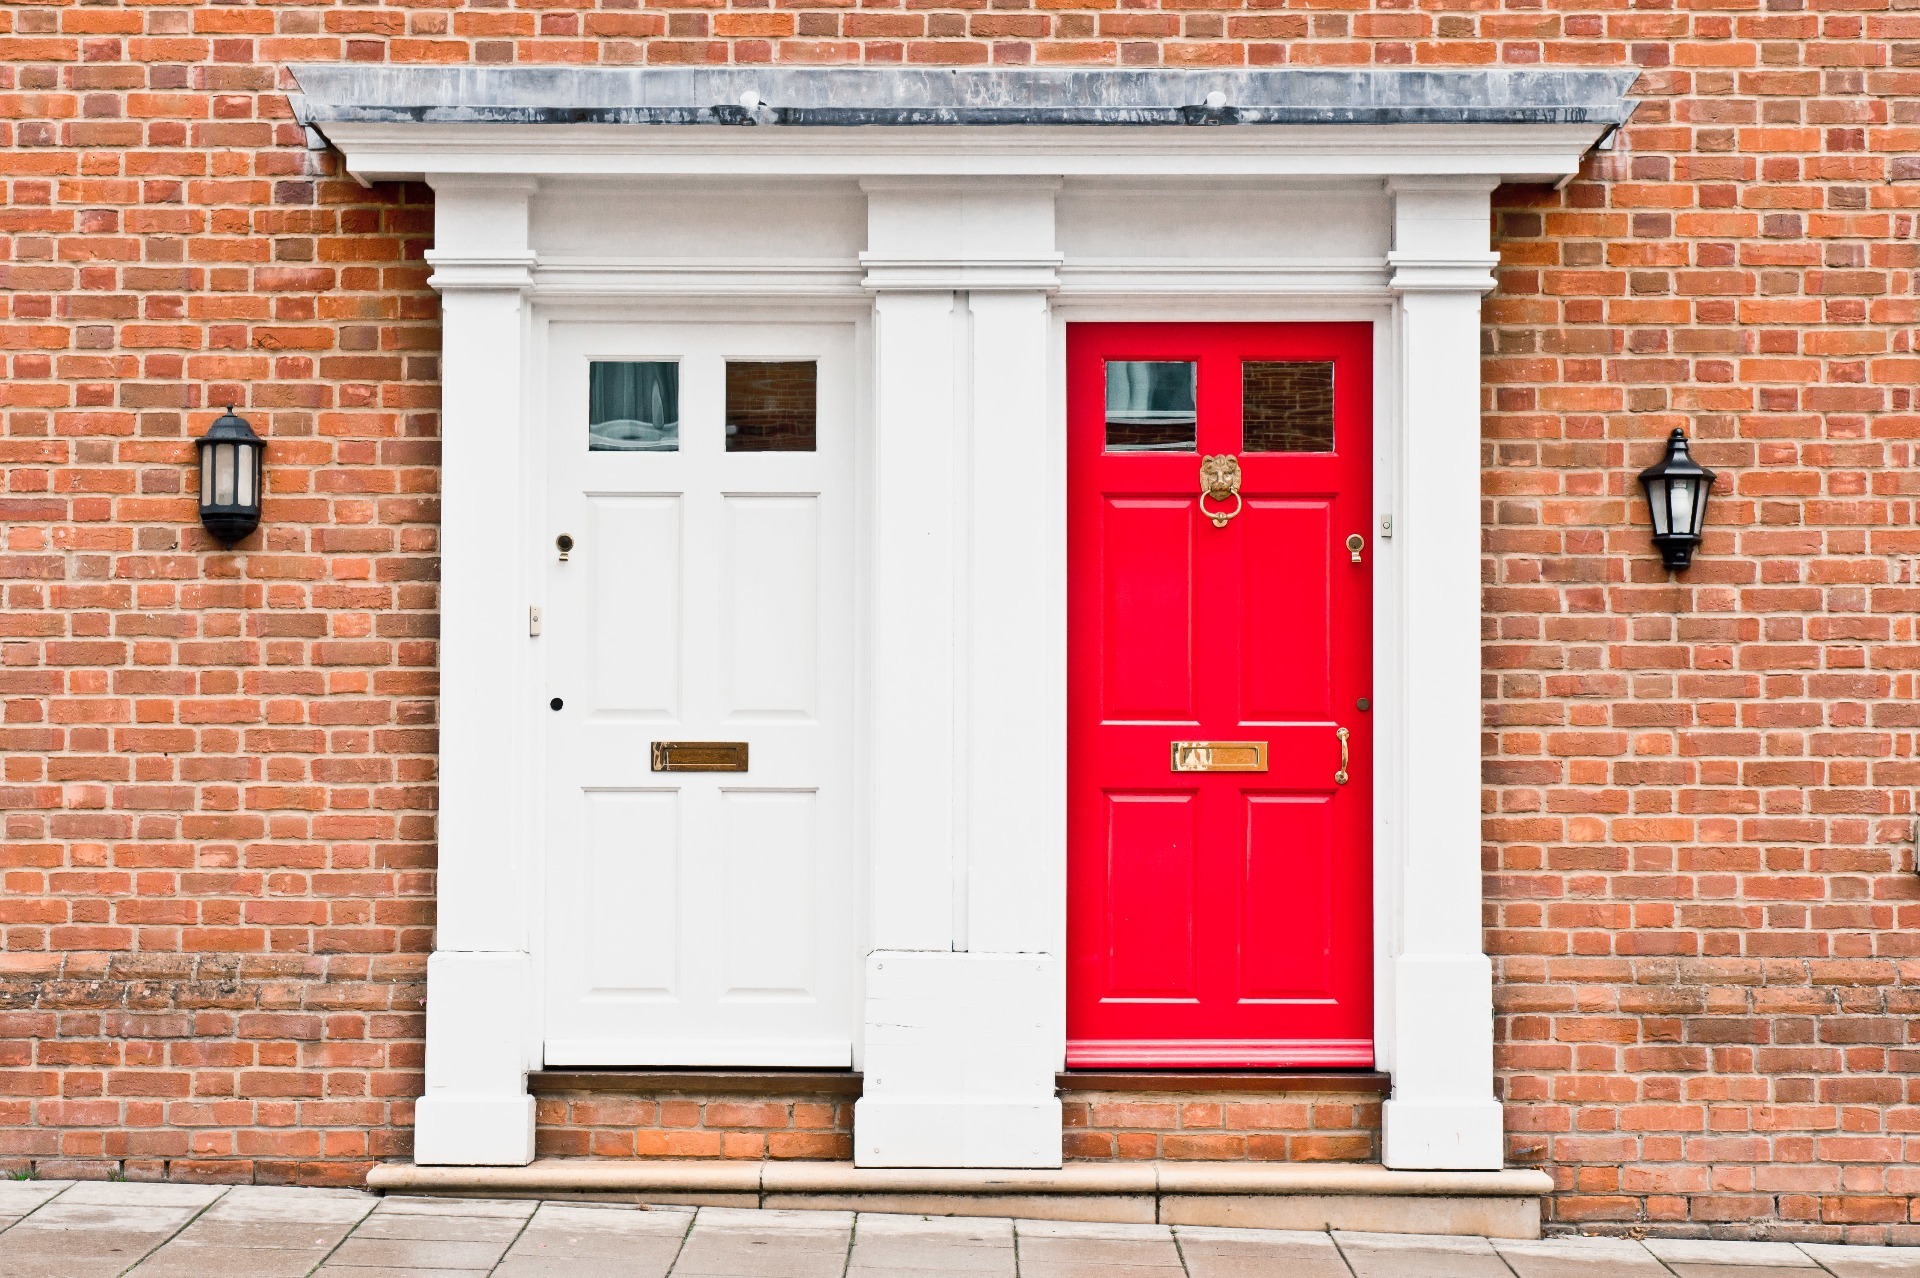 A red front door and a white front door with lights on the wall; our Conveyancing Solicitors discuss property development, and how we can help.